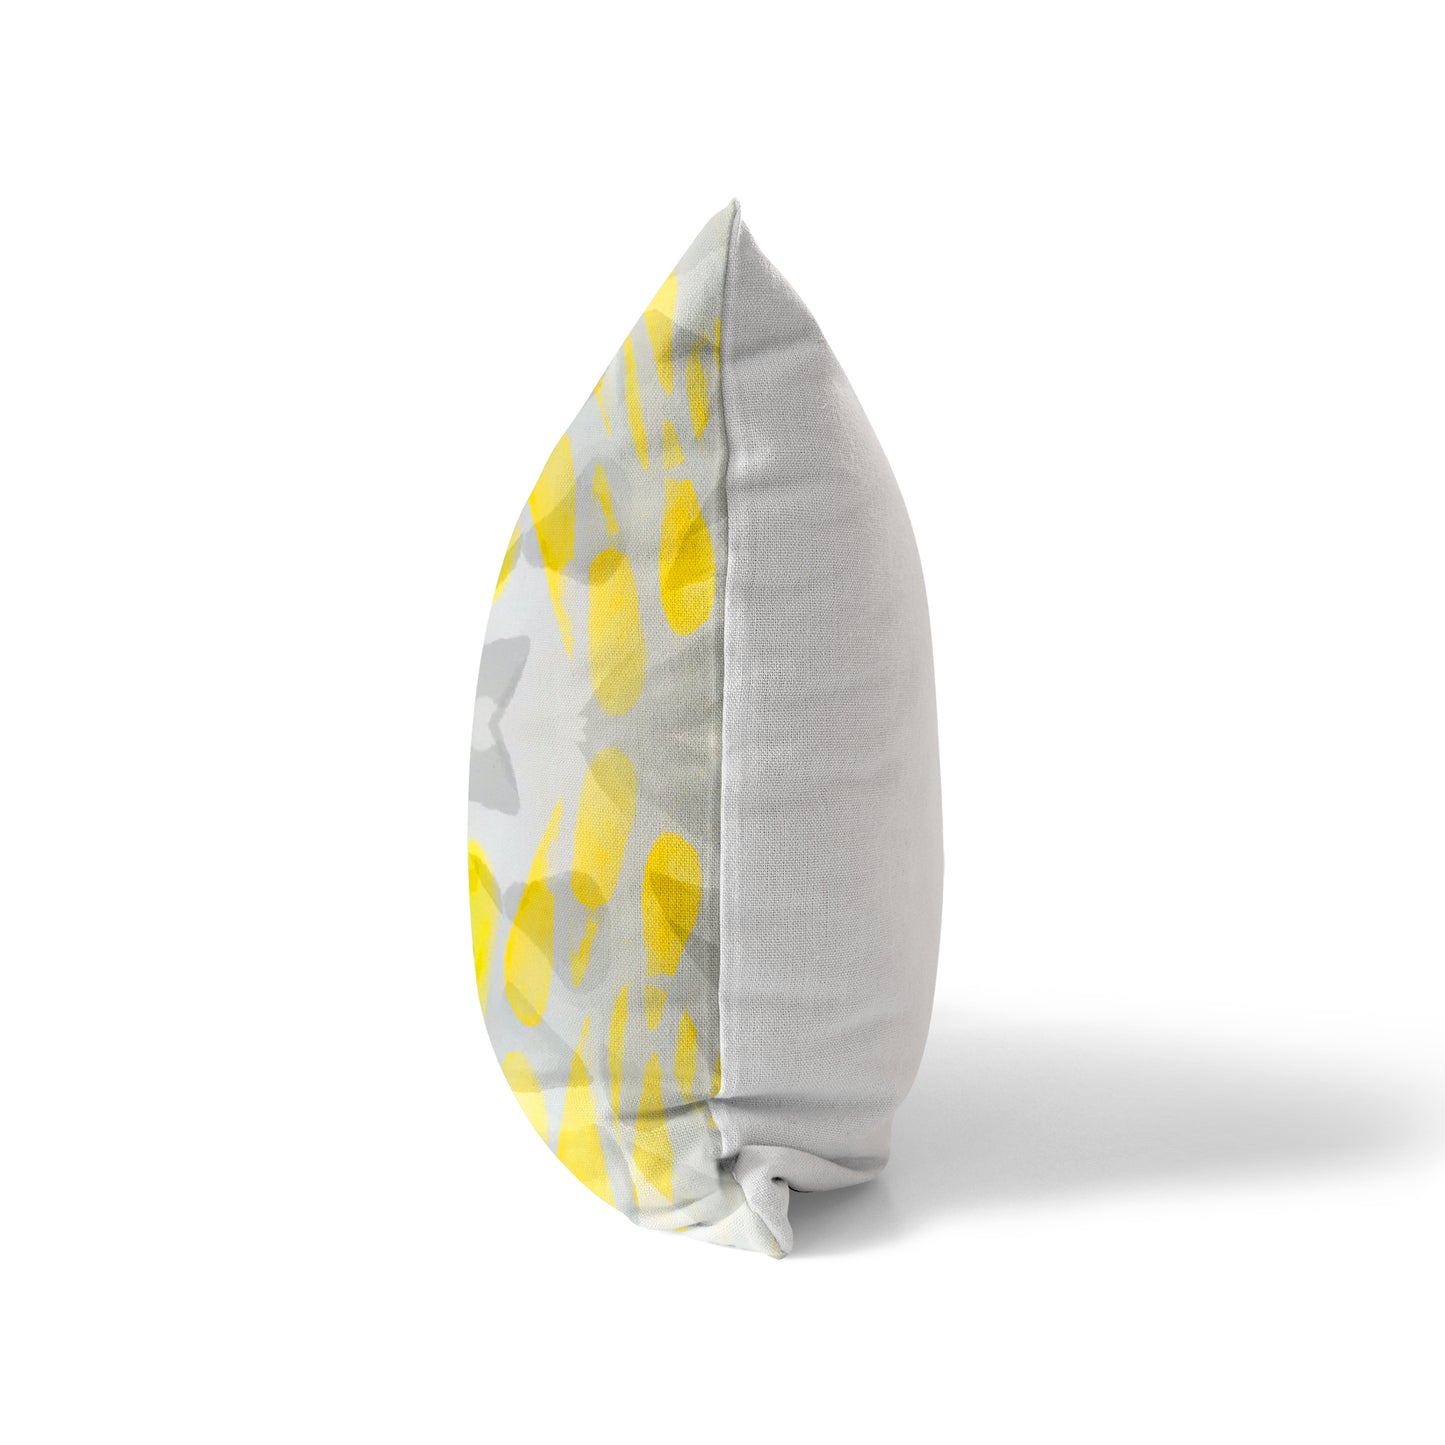 Side view of a pillow featuring a yellow and gray pattern and a solid whit back